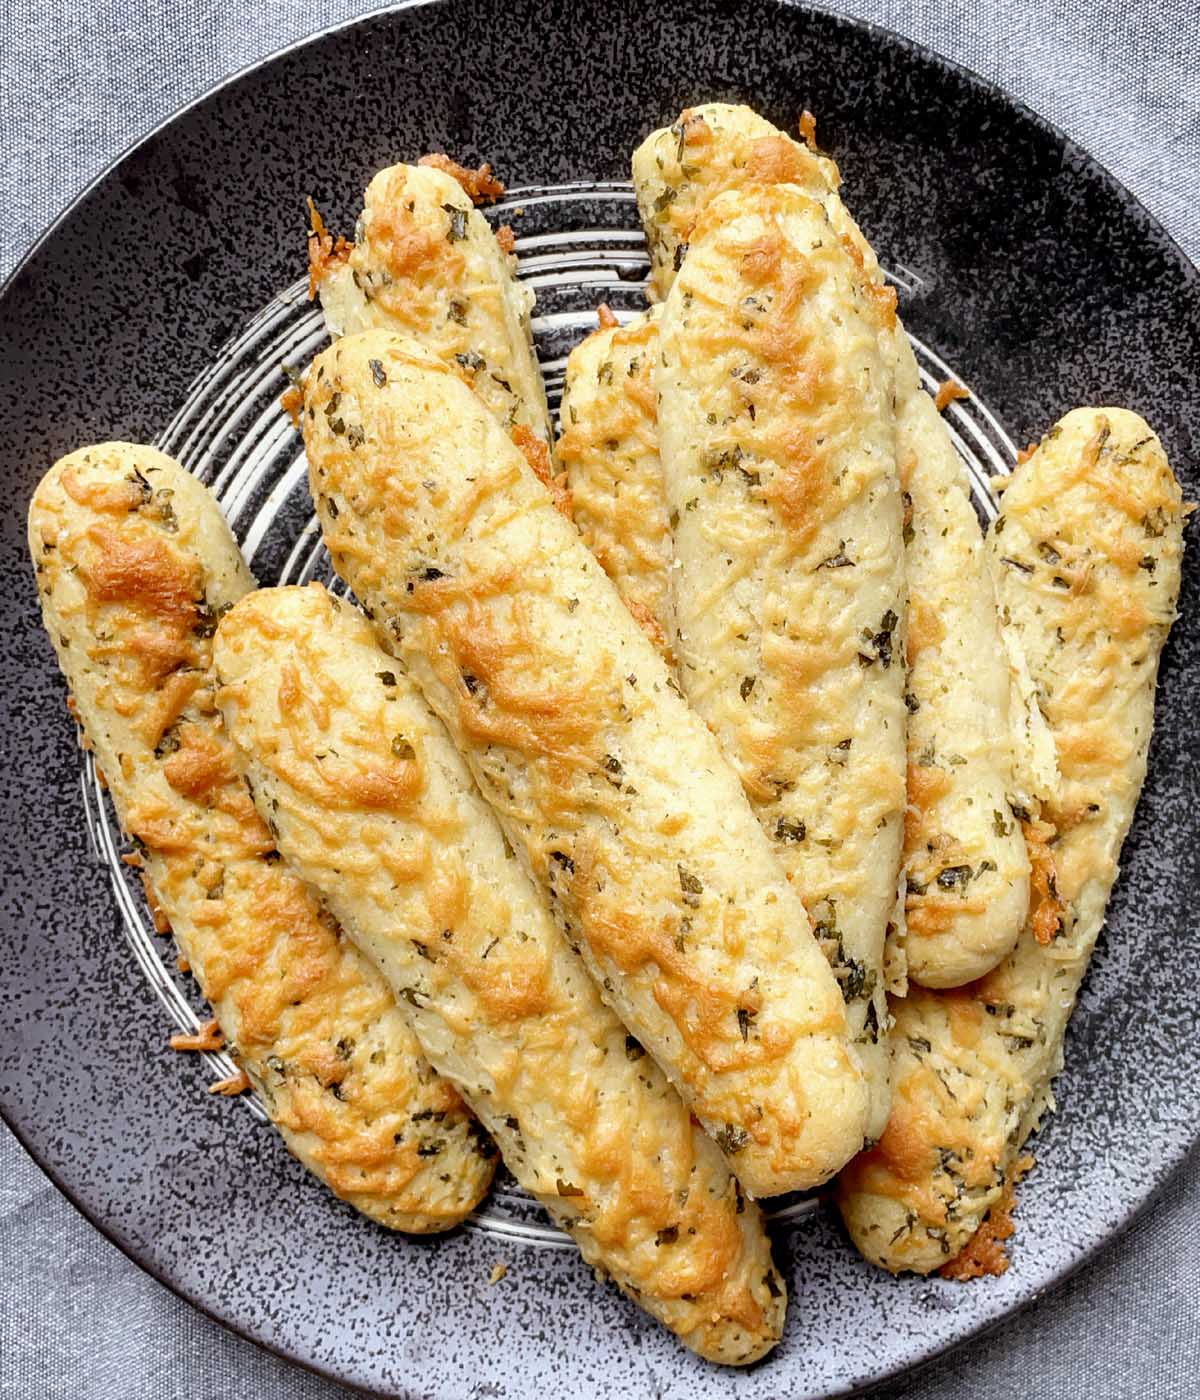 A dark round dish containing eight baked parmesan breadsticks.